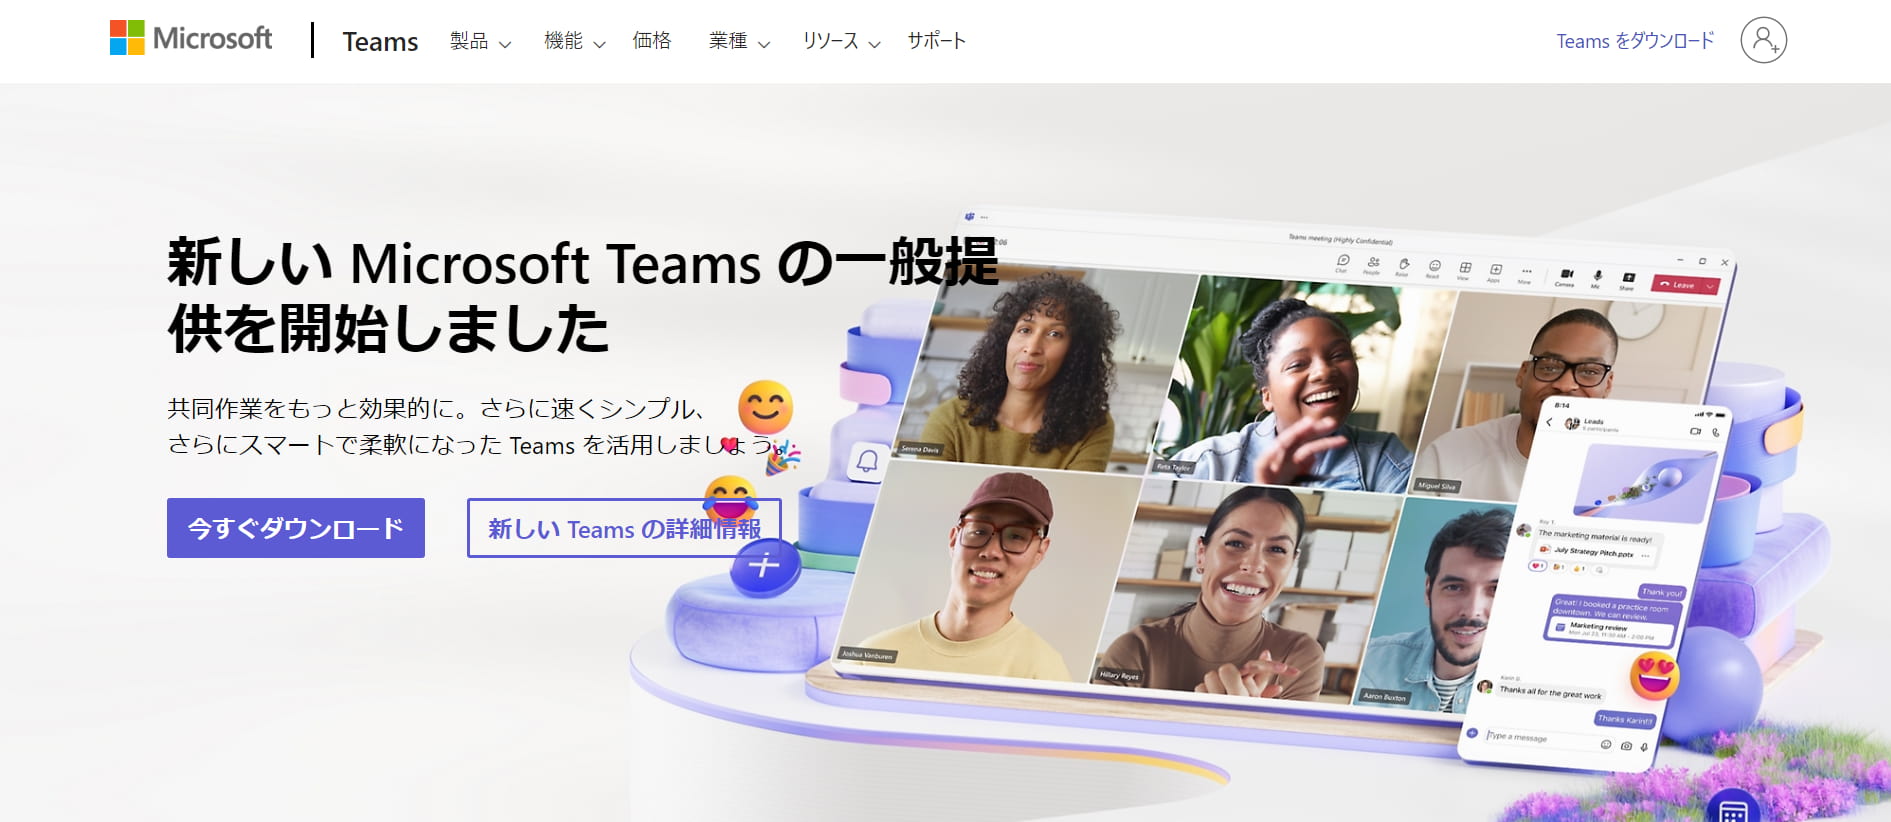 Microsoft Teams（マイクロソフト・チームズ）